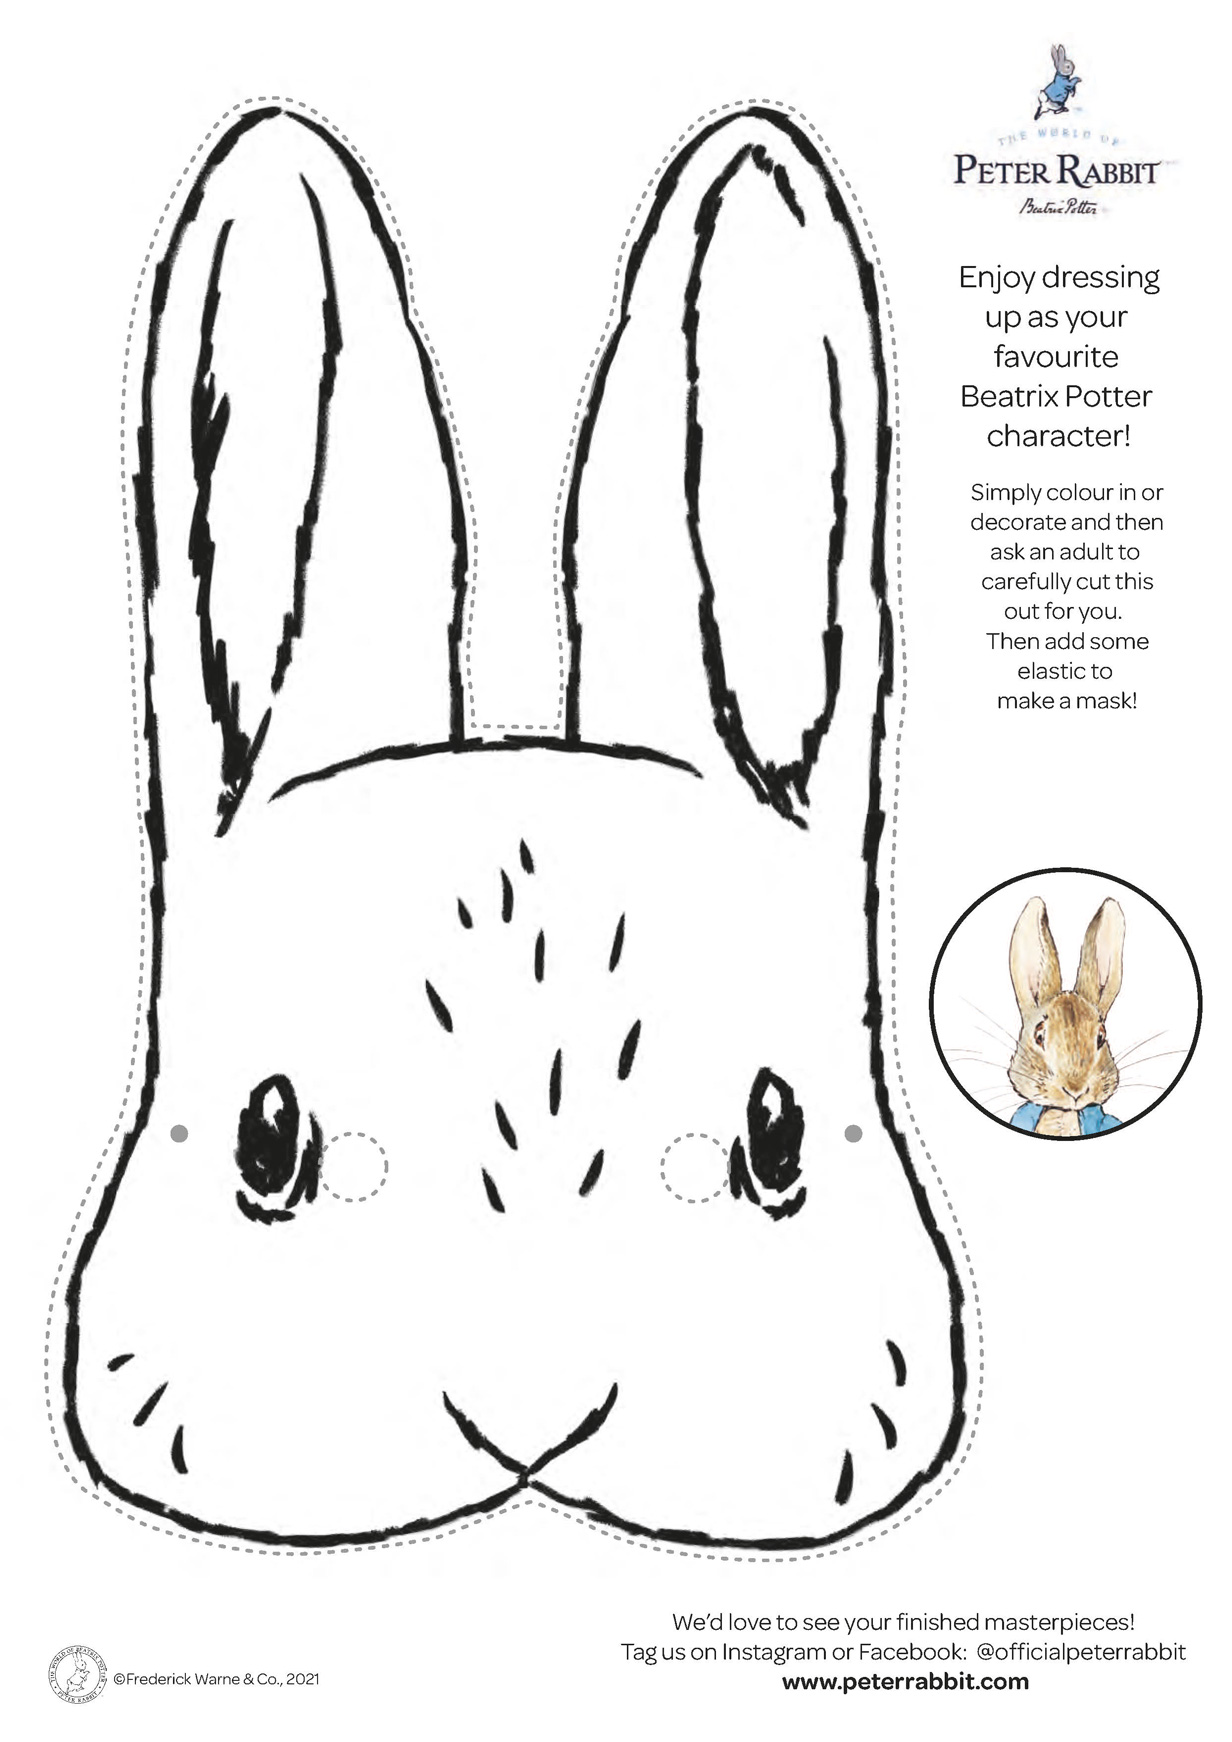 The cover image of the Character Masks Activity Pack on the Peter Rabbit website